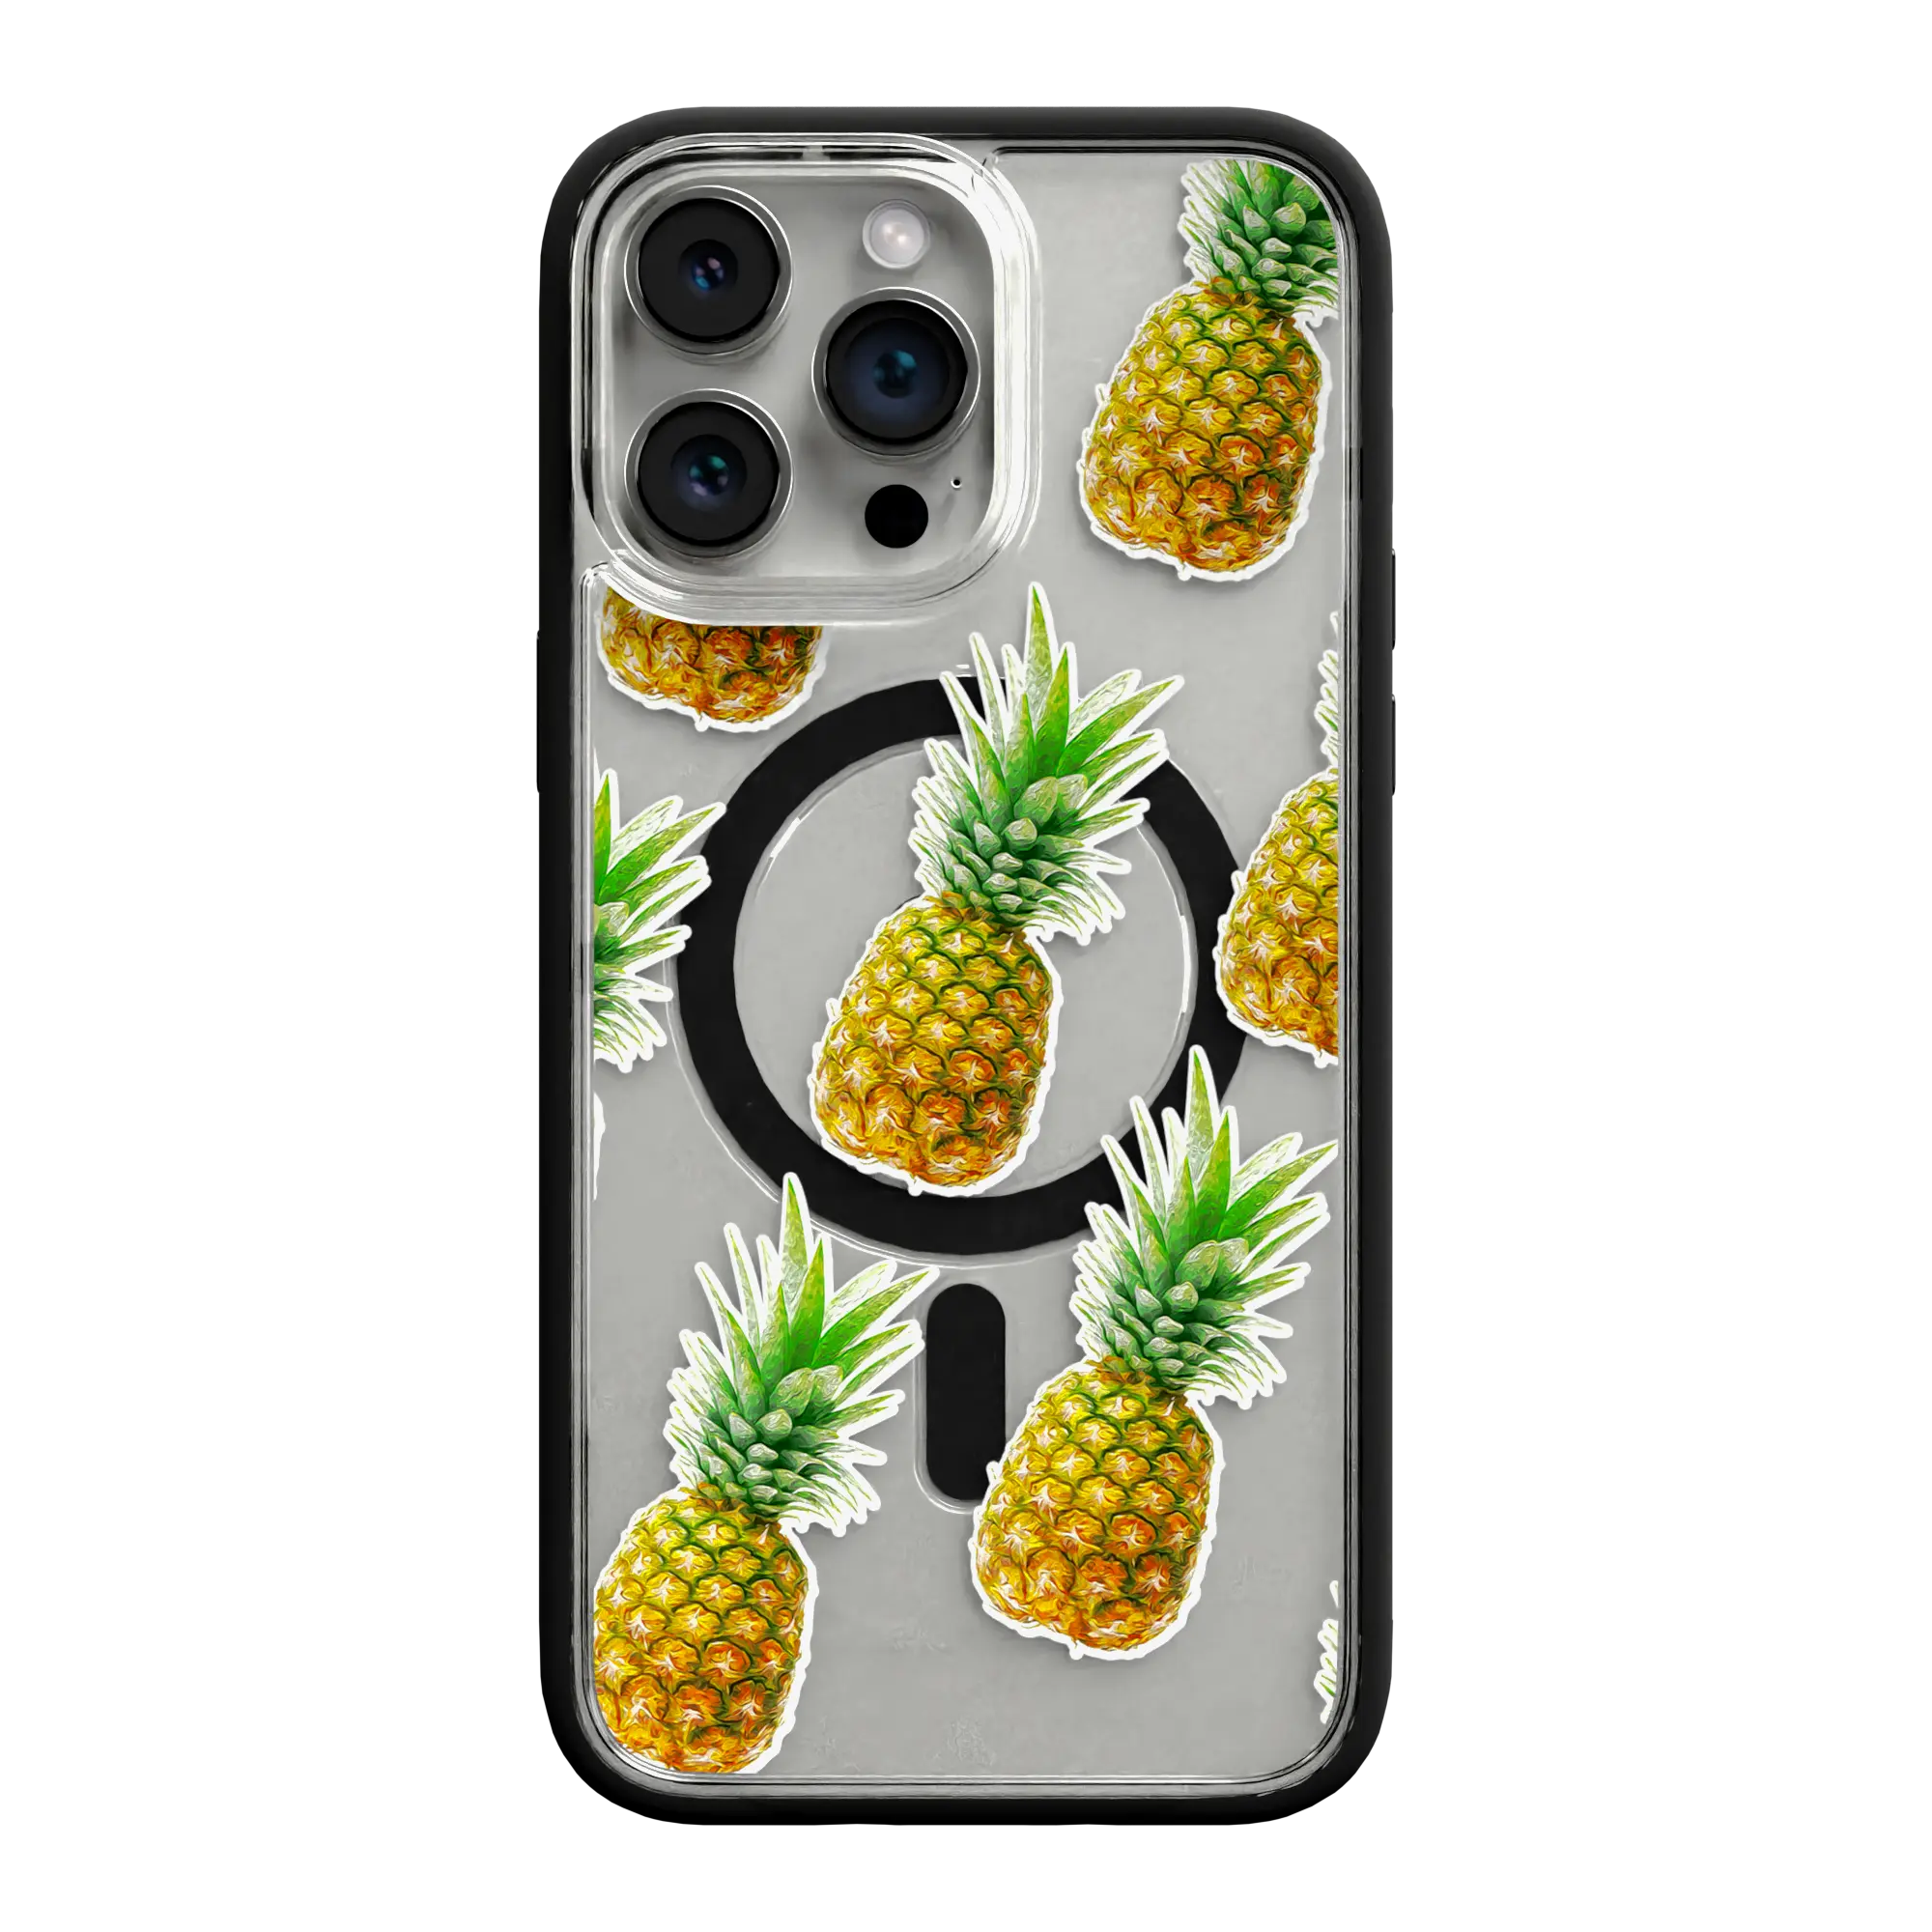 Apple-iPhone-12-Pro-Max-Crystal-Clear Pineapple Splash | Protective MagSafe Case | Fruits Collection for Apple iPhone 12 Series cellhelmet cellhelmet